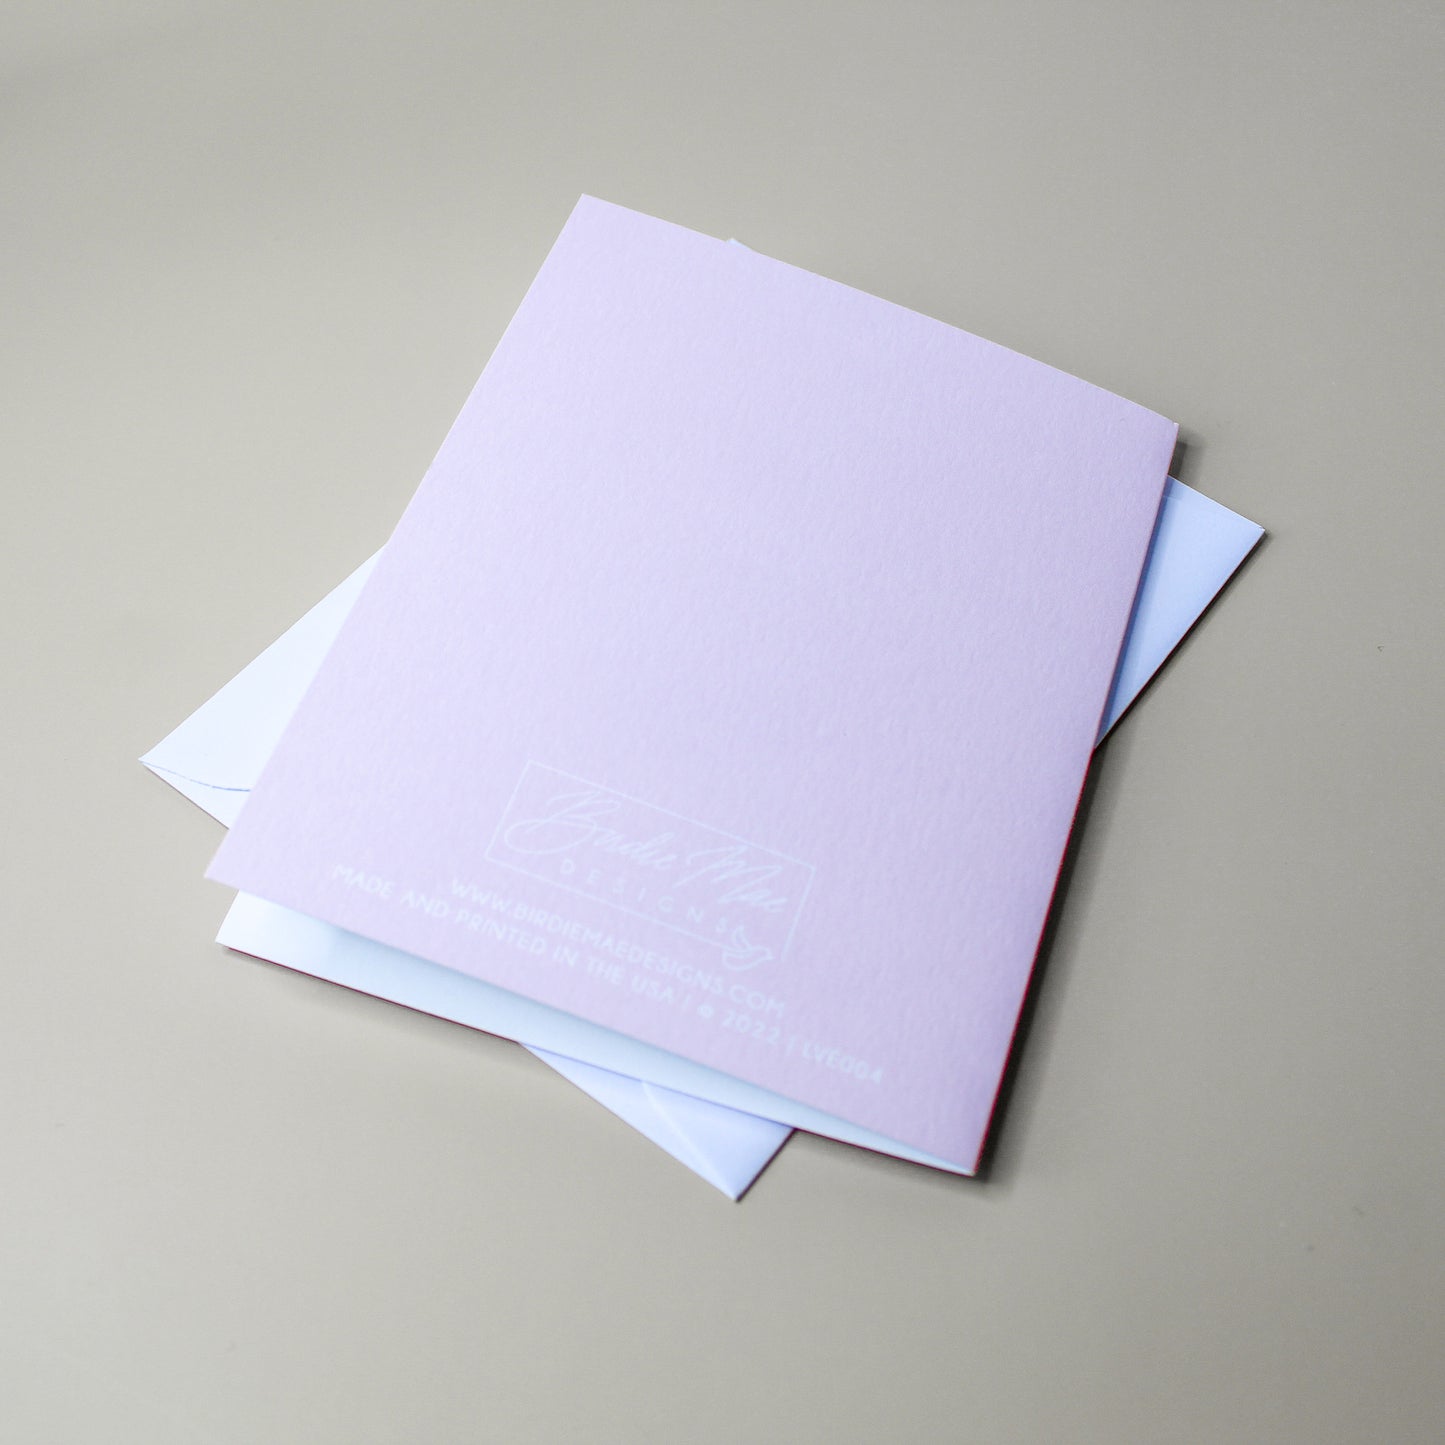 Our "Love You" card is the perfect card for an anniversary, wedding, valentines day - or a "just because" card! Each card is folded to 4.25" tall by 5.5" wide, is blank inside and comes with a matching white envelope. Cards are packaged in cellophane sleeves.